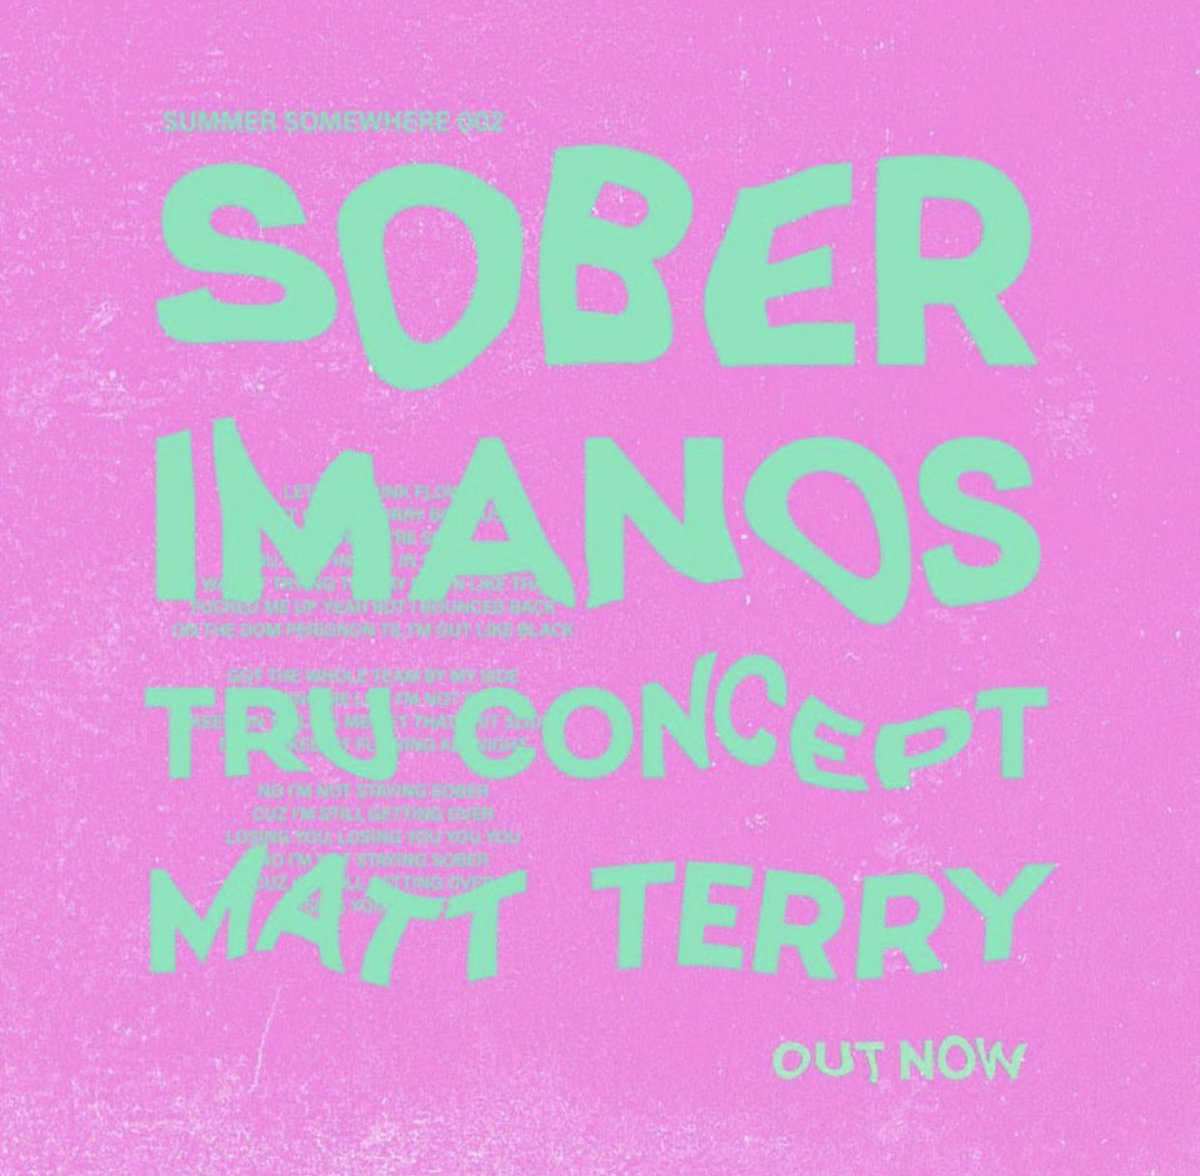 SOBER - @DJImanos @truconcept_ and myself have a little treat for you all to enjoy especially over the summer ! OUT NOW ☀️🍹